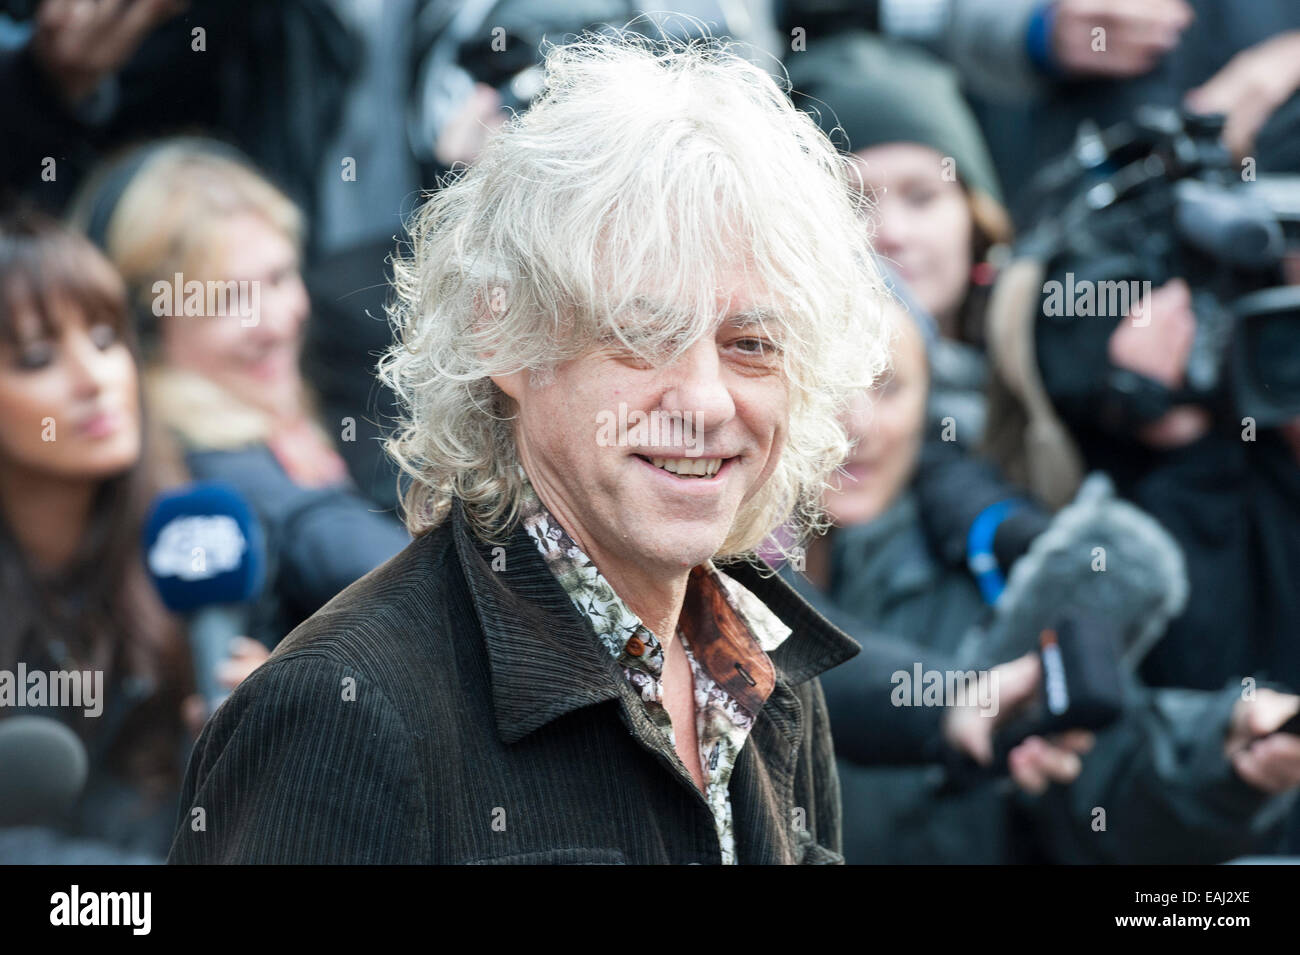 Basing Street, London, UK. 15th November 2014. Artists arrive at Sarm Studios in Notting Hill, west London, to record Band Aid. Pictured: Bob Geldof greets the crowd outside Sarm Studios. Credit:  Lee Thomas/Alamy Live News Stock Photo